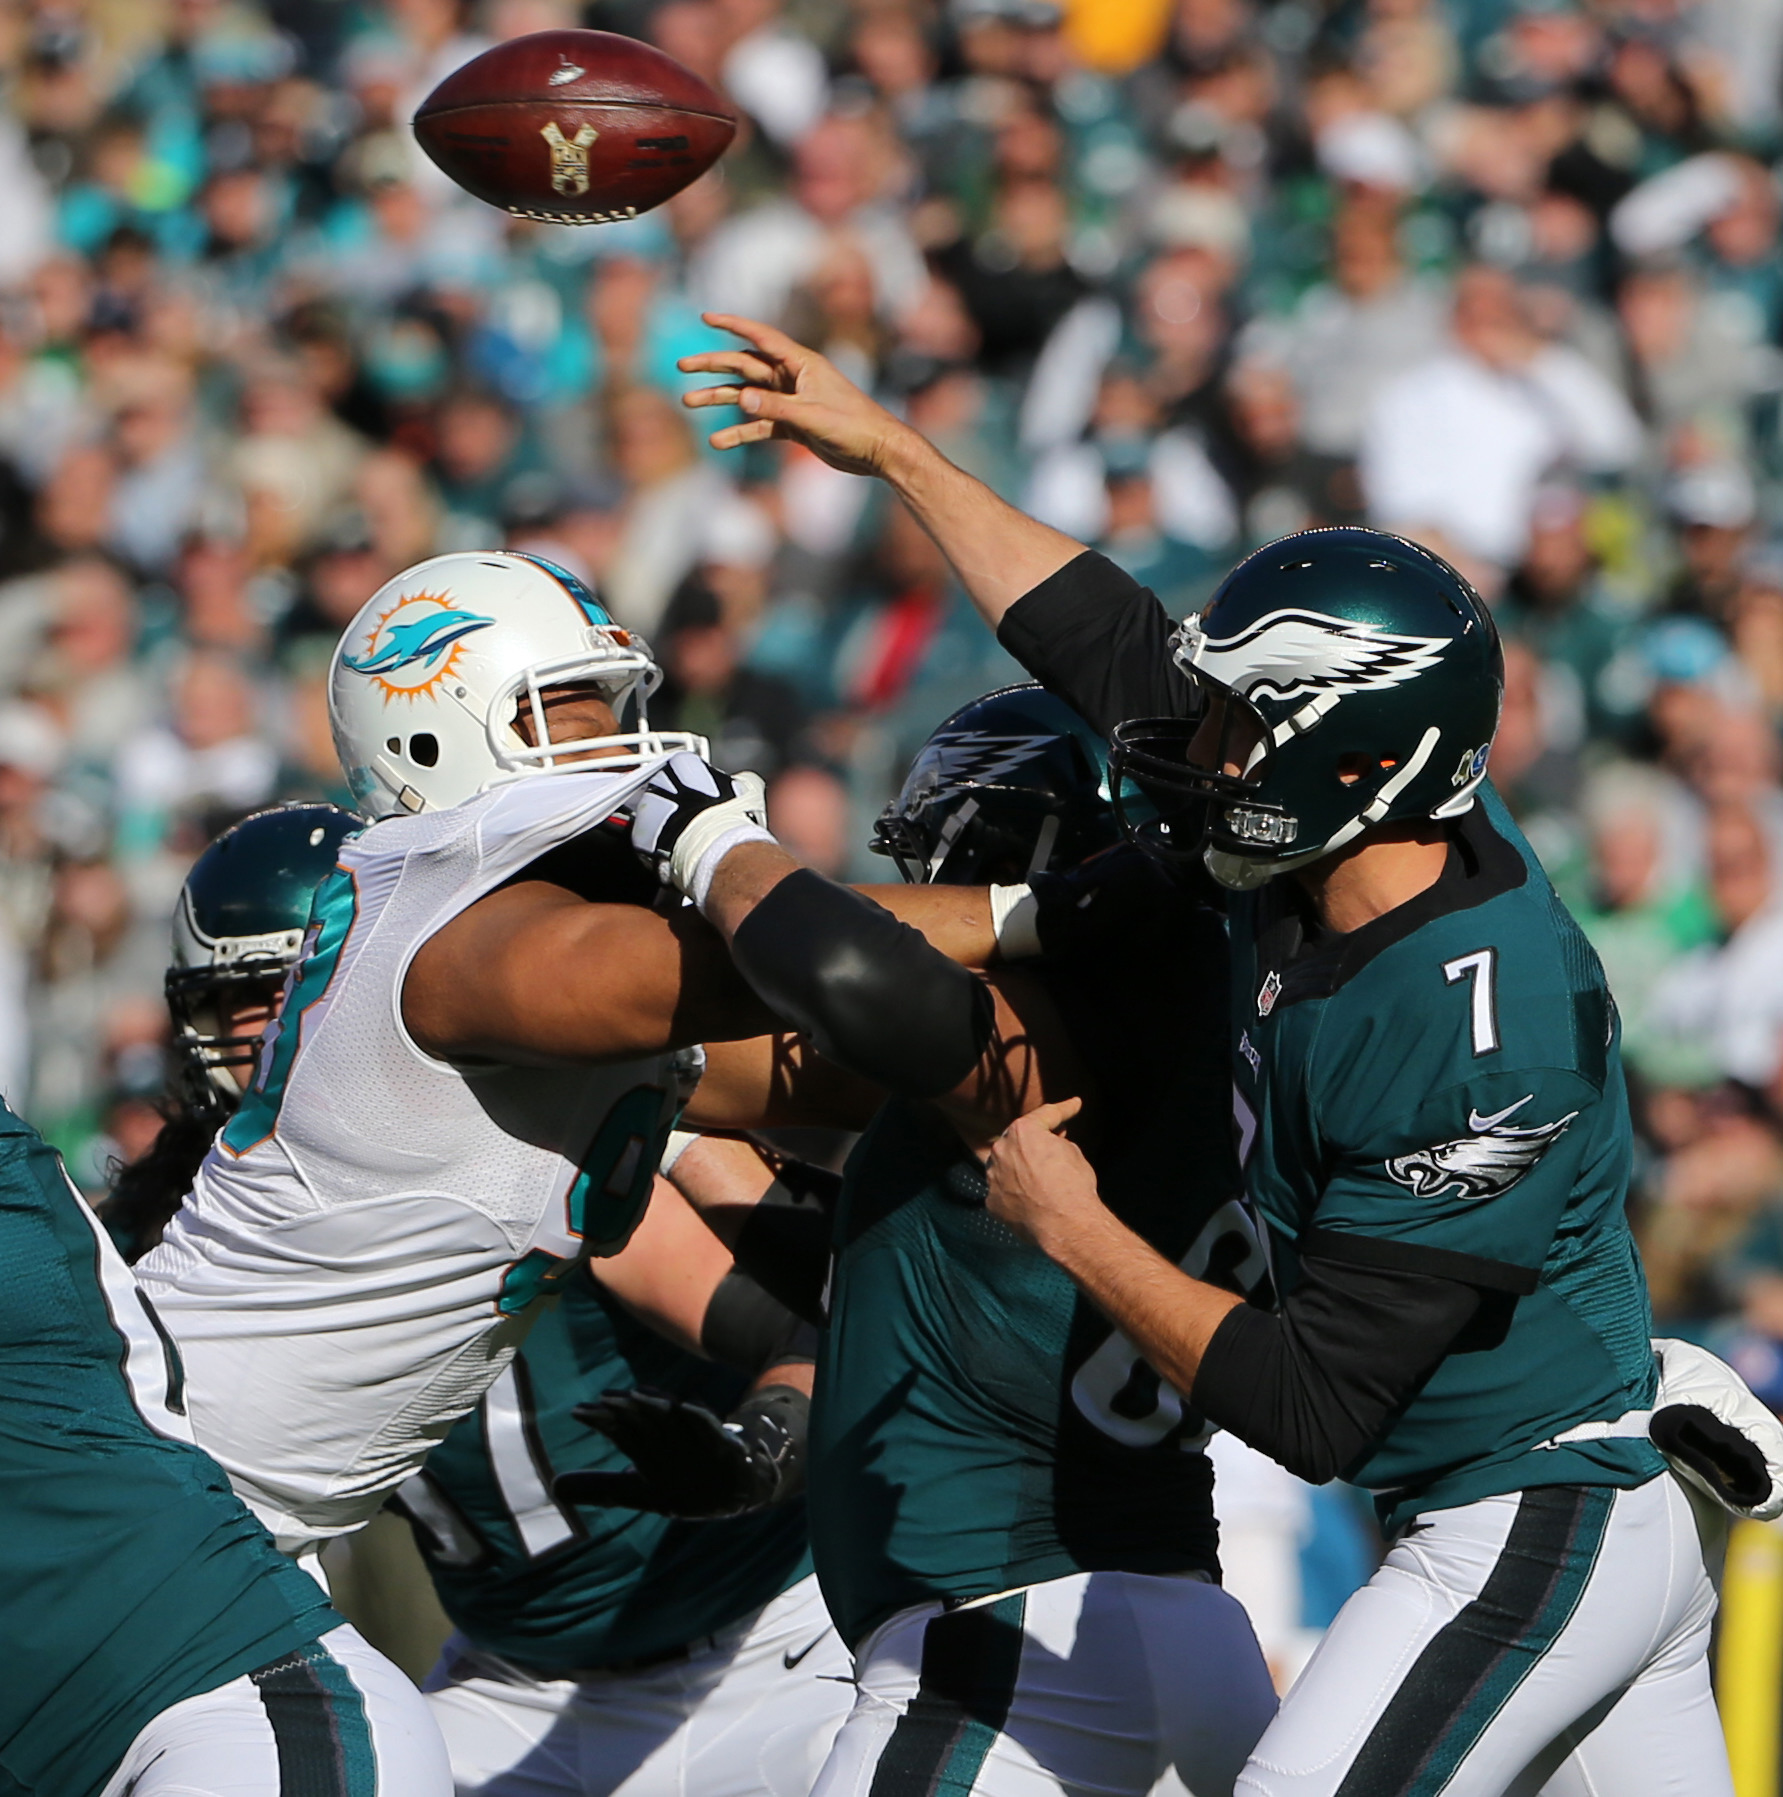 Eagles Offensive Line Must Rebound After Poor Performance